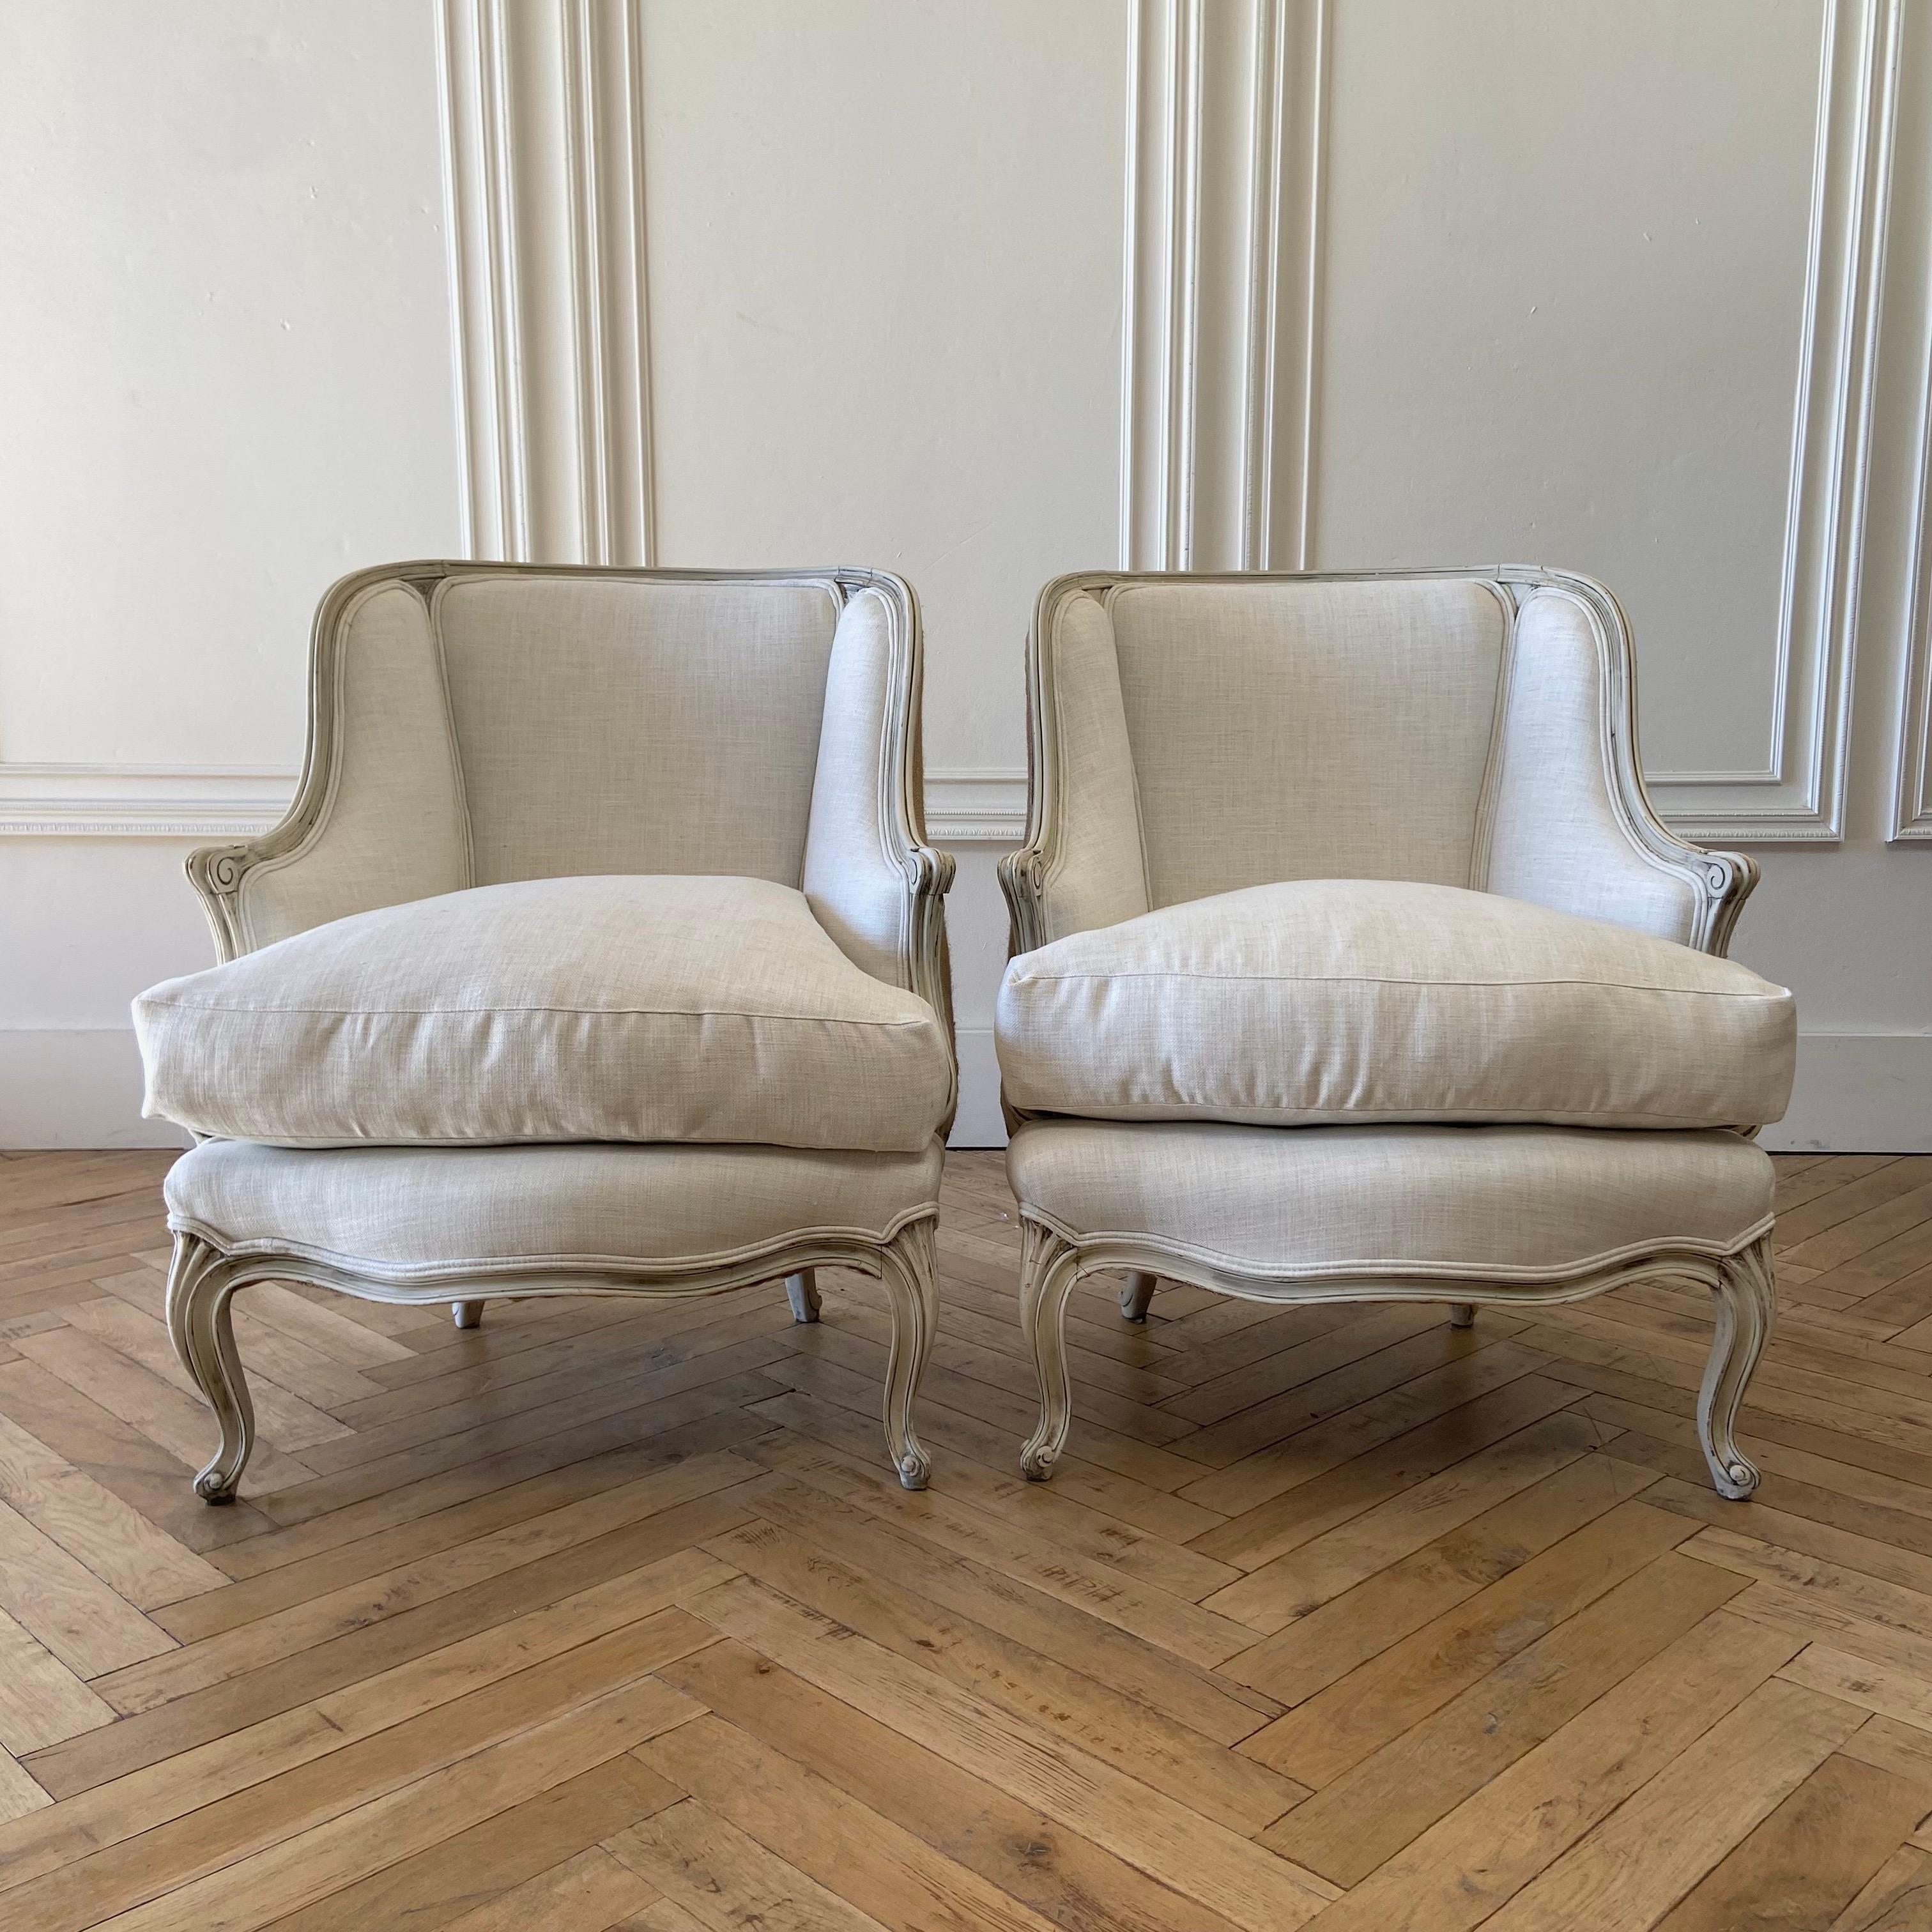 Pair of Vintage Bergere chairs in the Louis XV Style.
Oyster white painted finish, with subtle distressed edges, with antique glazed patina.
Upholstery is in a natural linen blend herringbone, with down wrapped seat cushions. Solid and sturdy